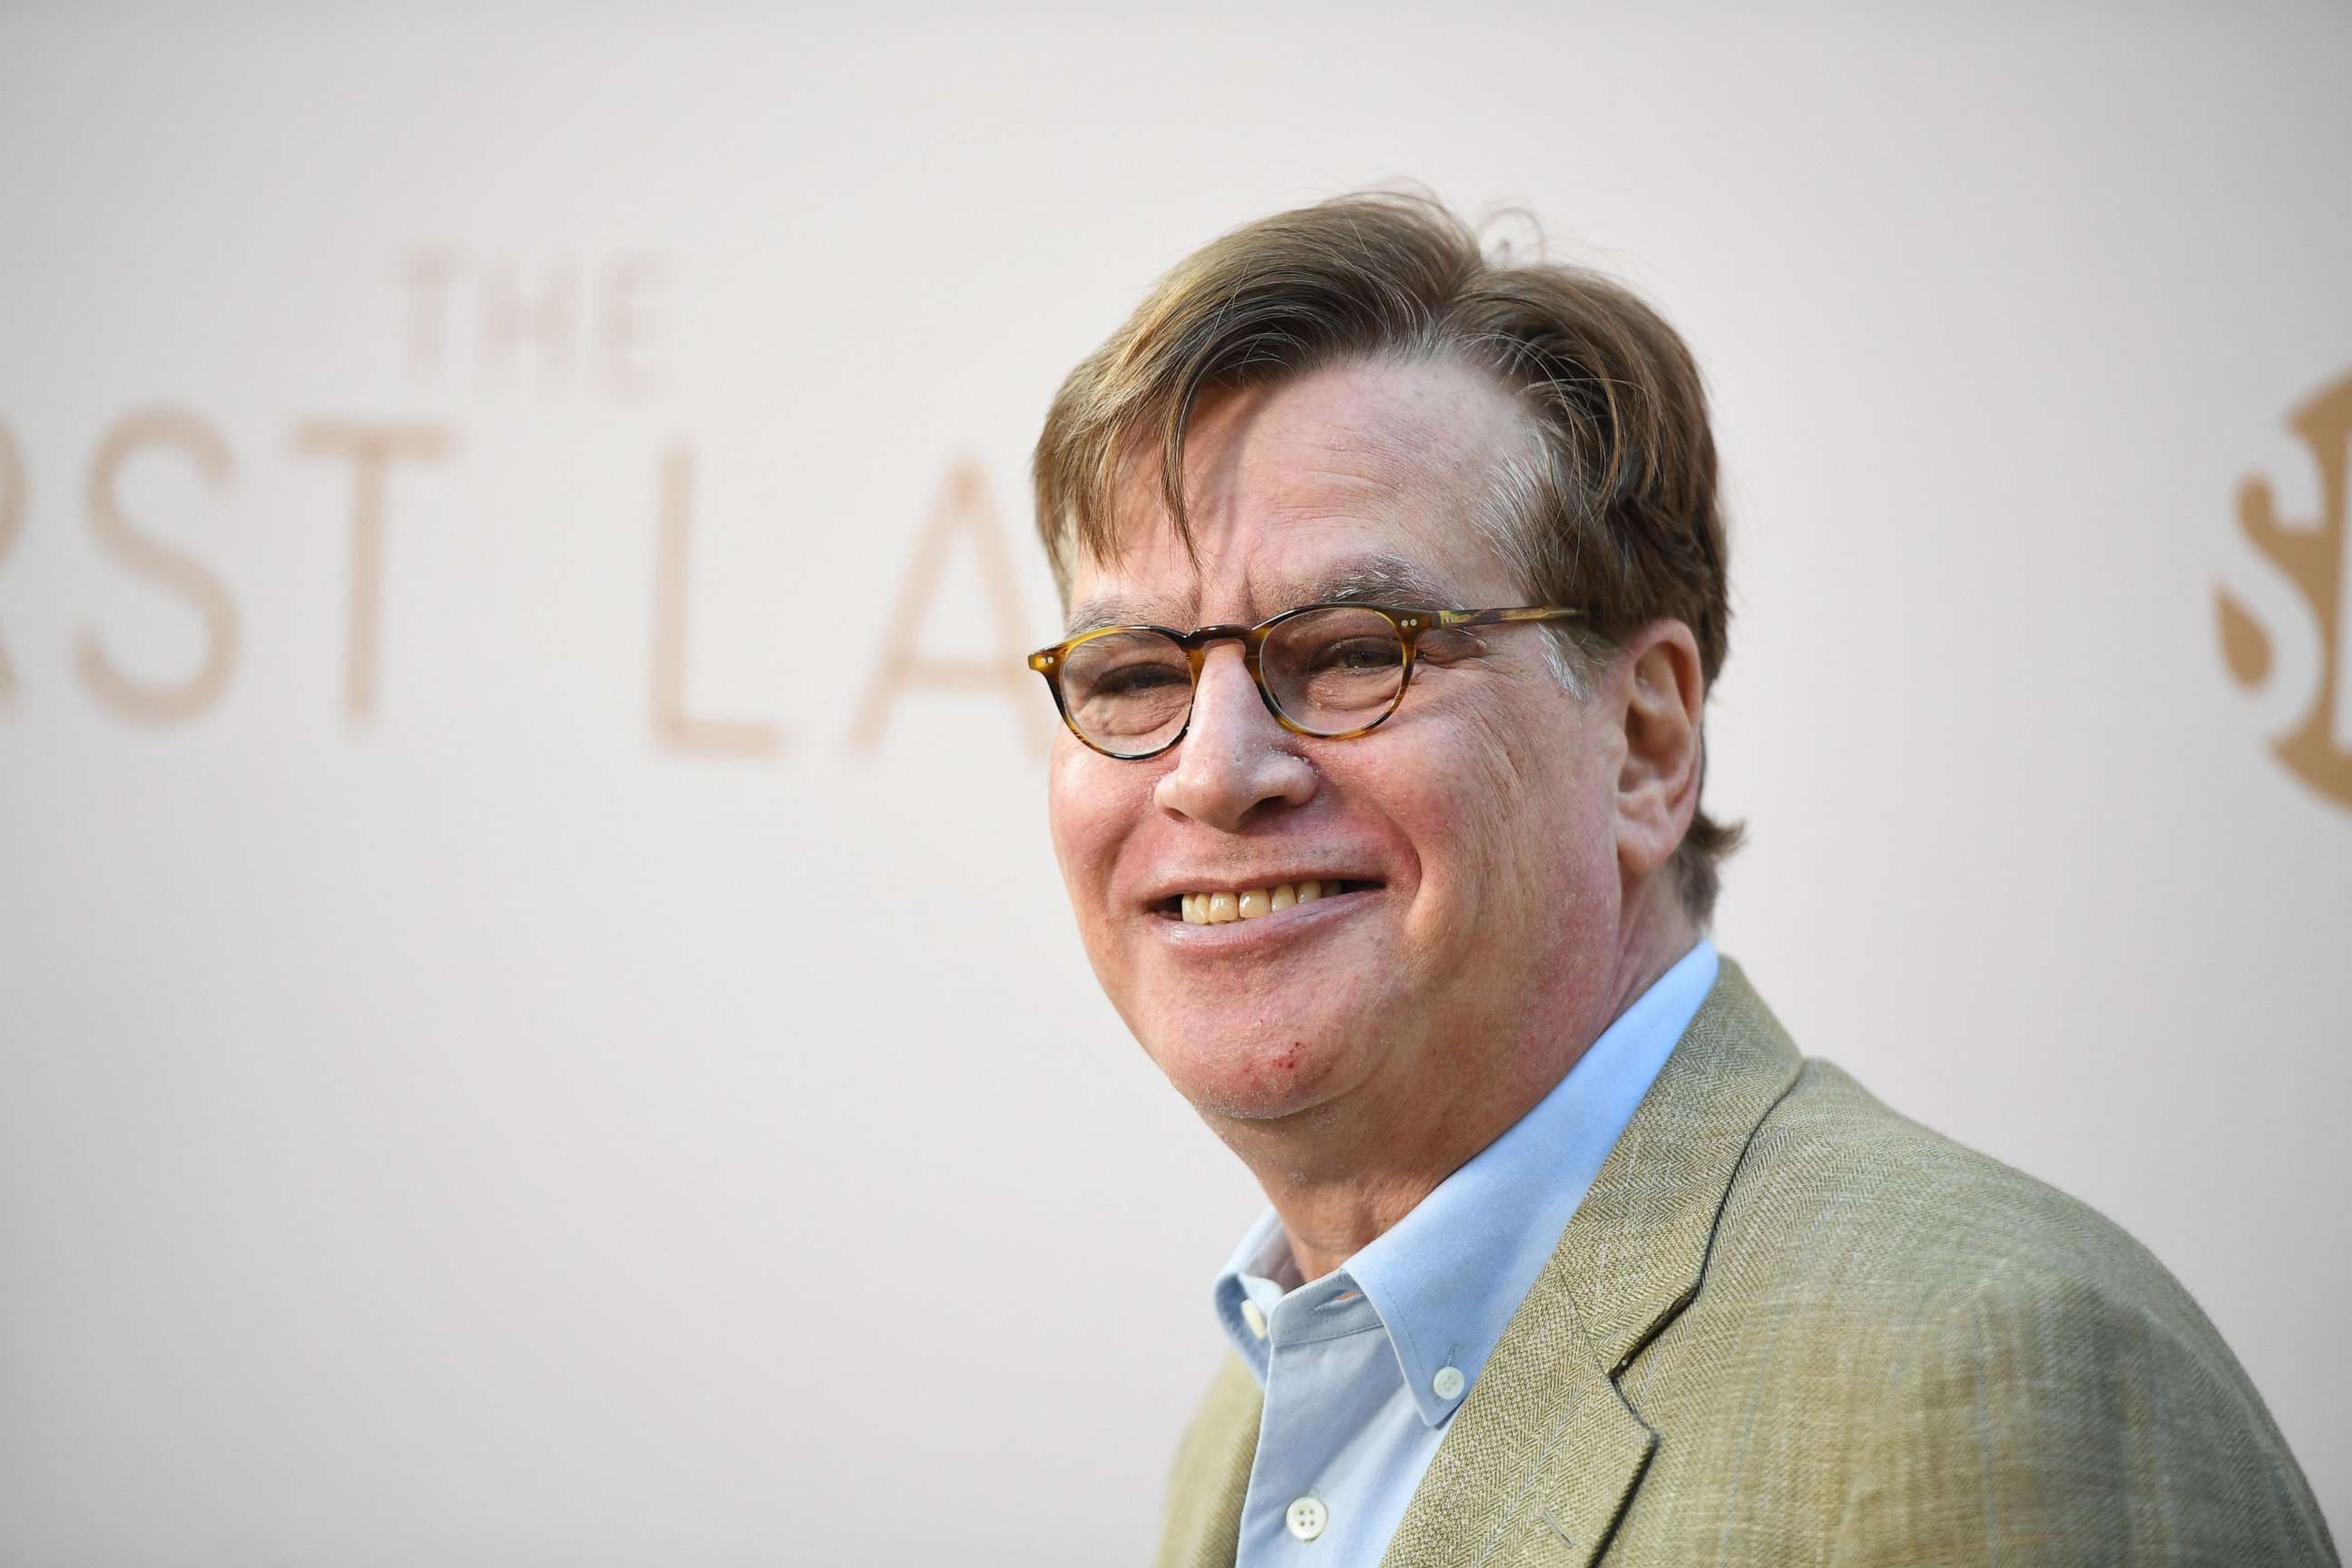 PHOTO: Aaron Sorkin attends the premiere of "The First Lady" in Los Angeles, Apr. 14, 2022.